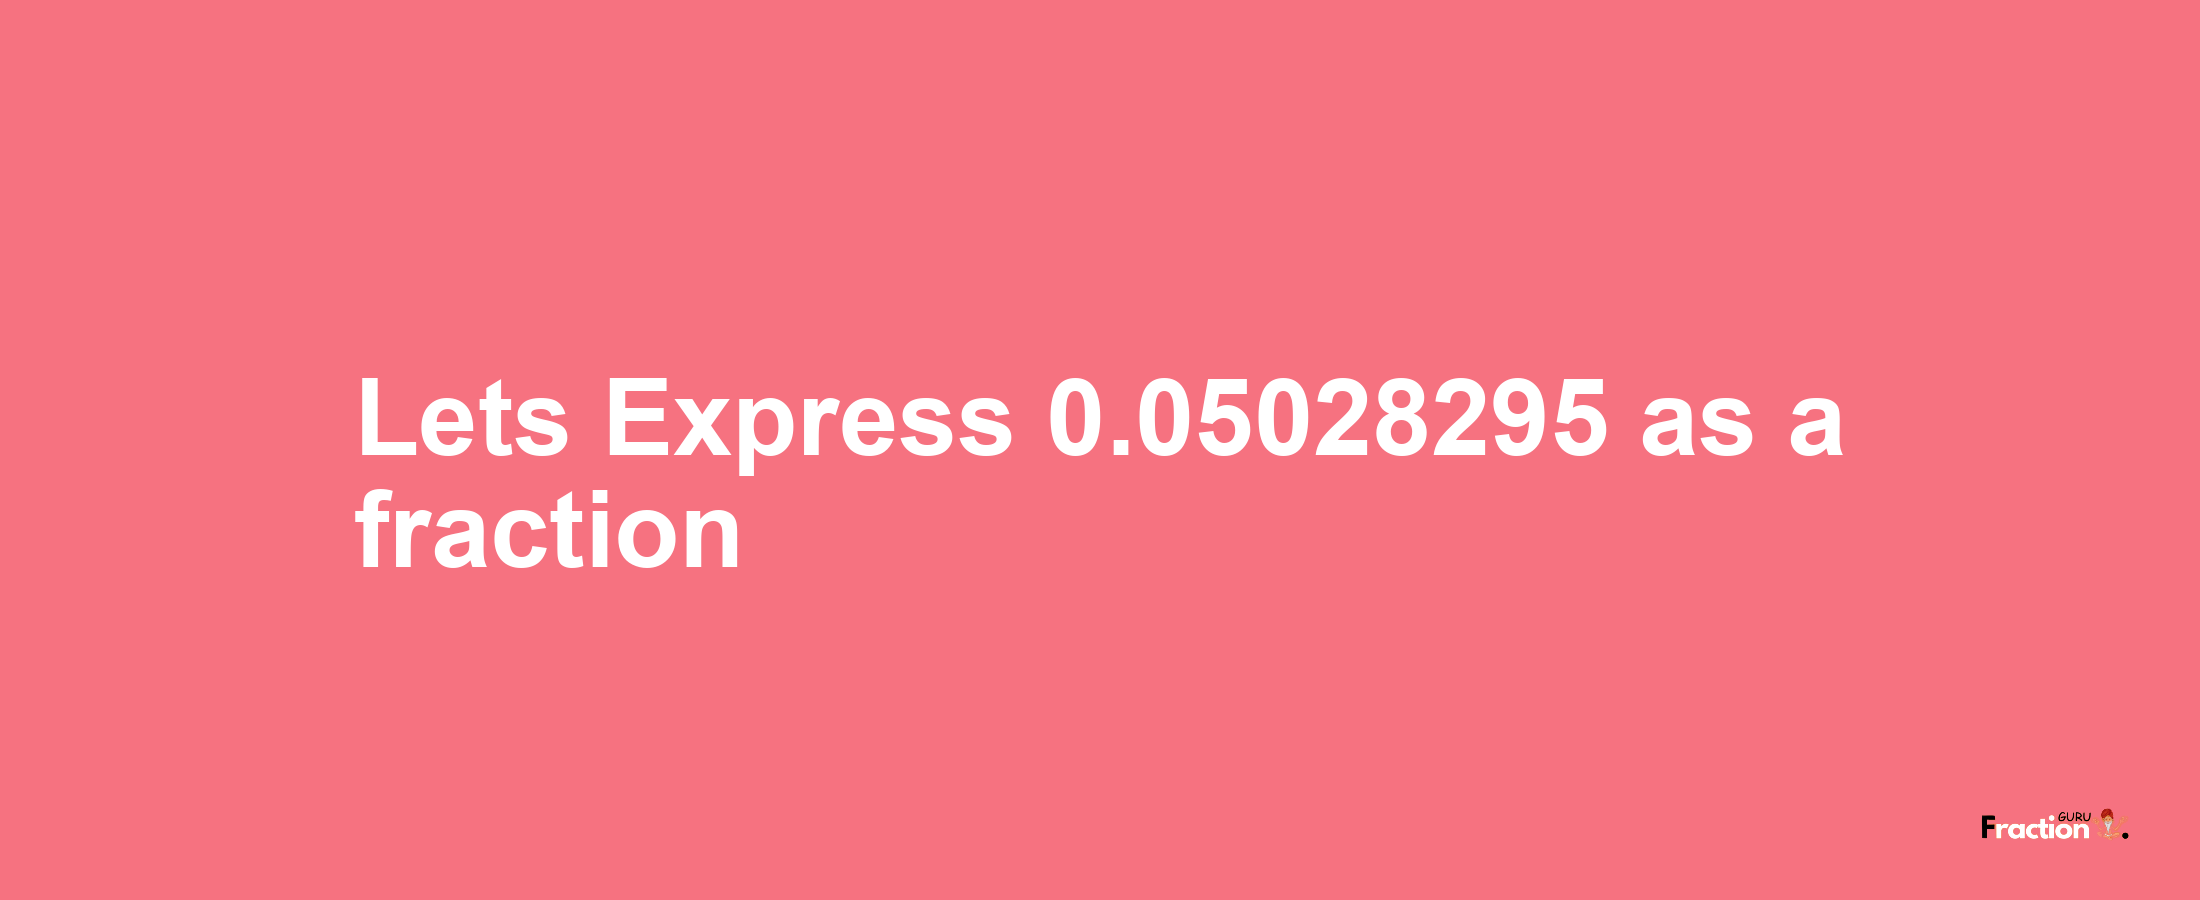 Lets Express 0.05028295 as afraction